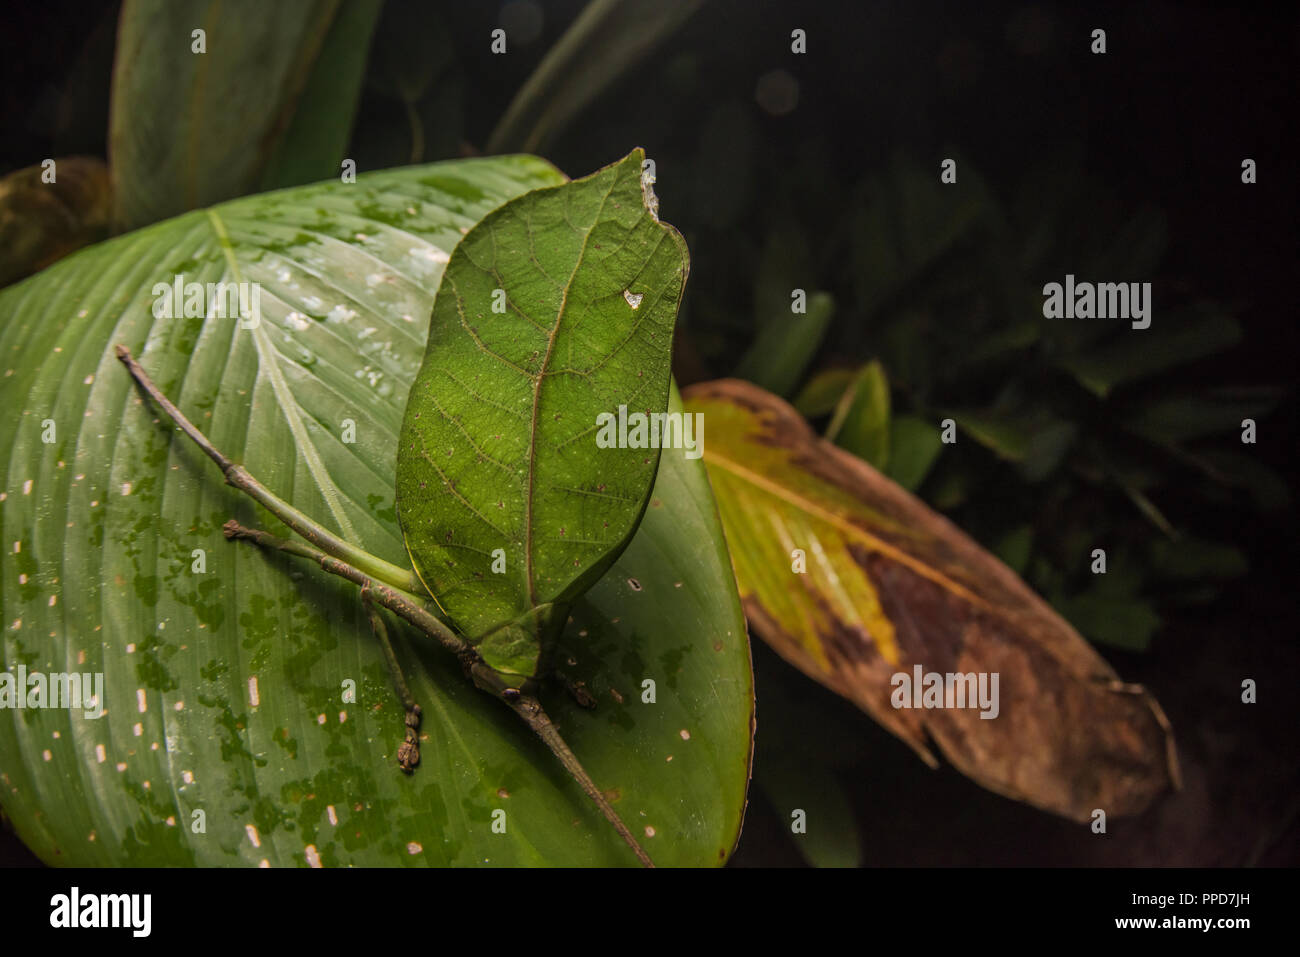 A katydid blending in and mimicking a leaf in the Amazon rainforest in order to stay hidden from predators. Stock Photo